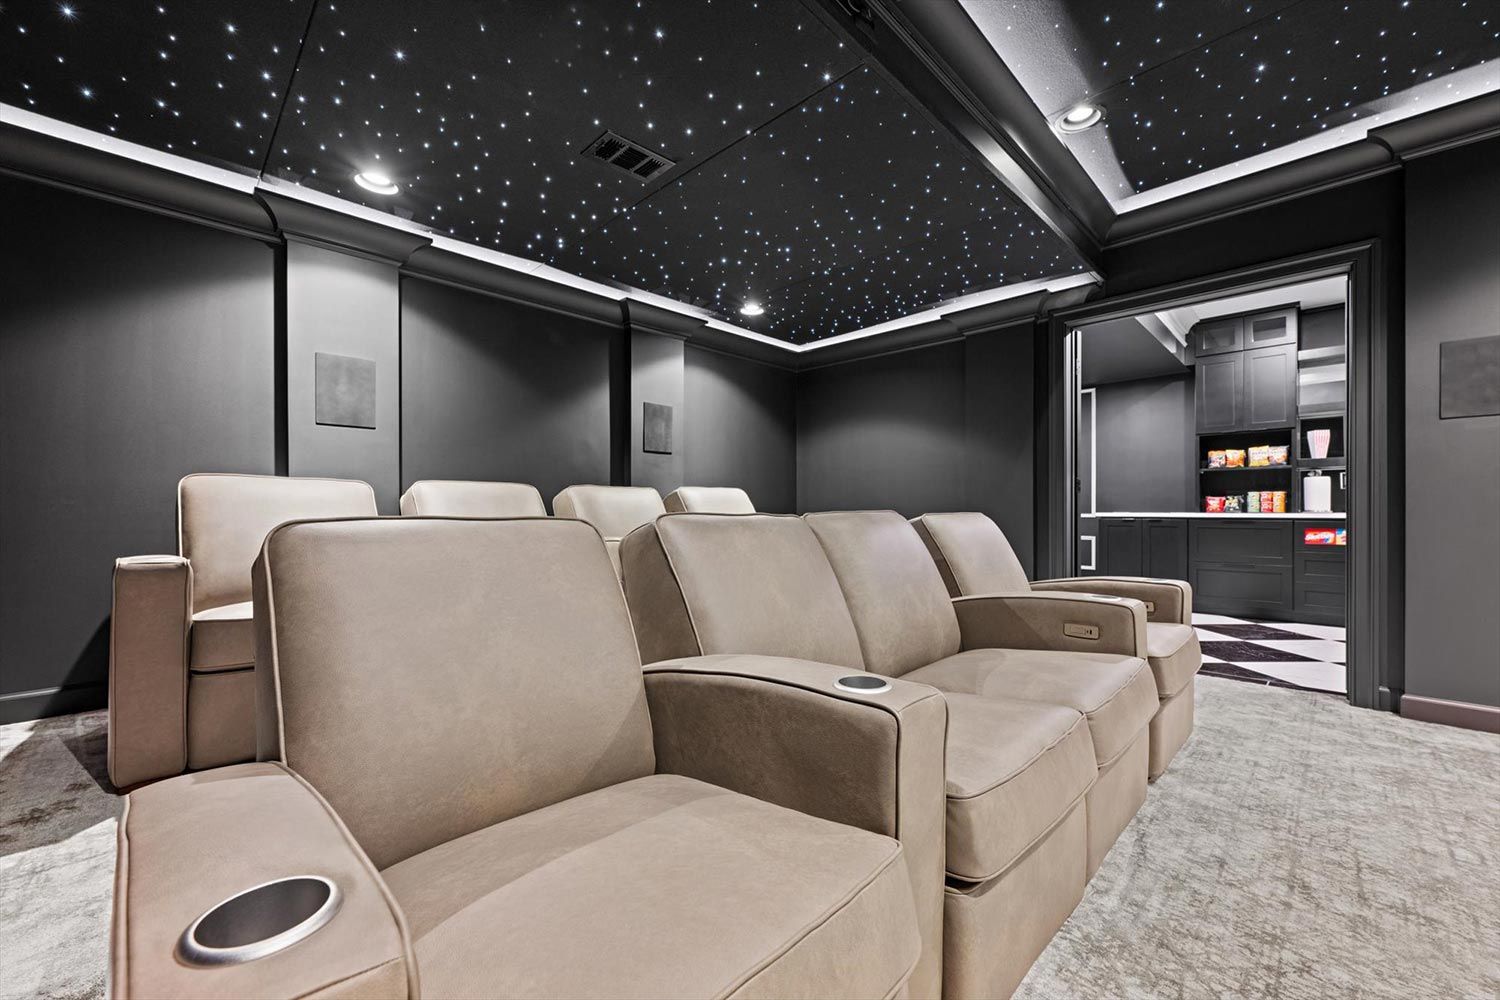 Comfortable home theater seating arranged in rows, facing a large projection screen with a starry ceiling, designed to enhance the cinematic experience.